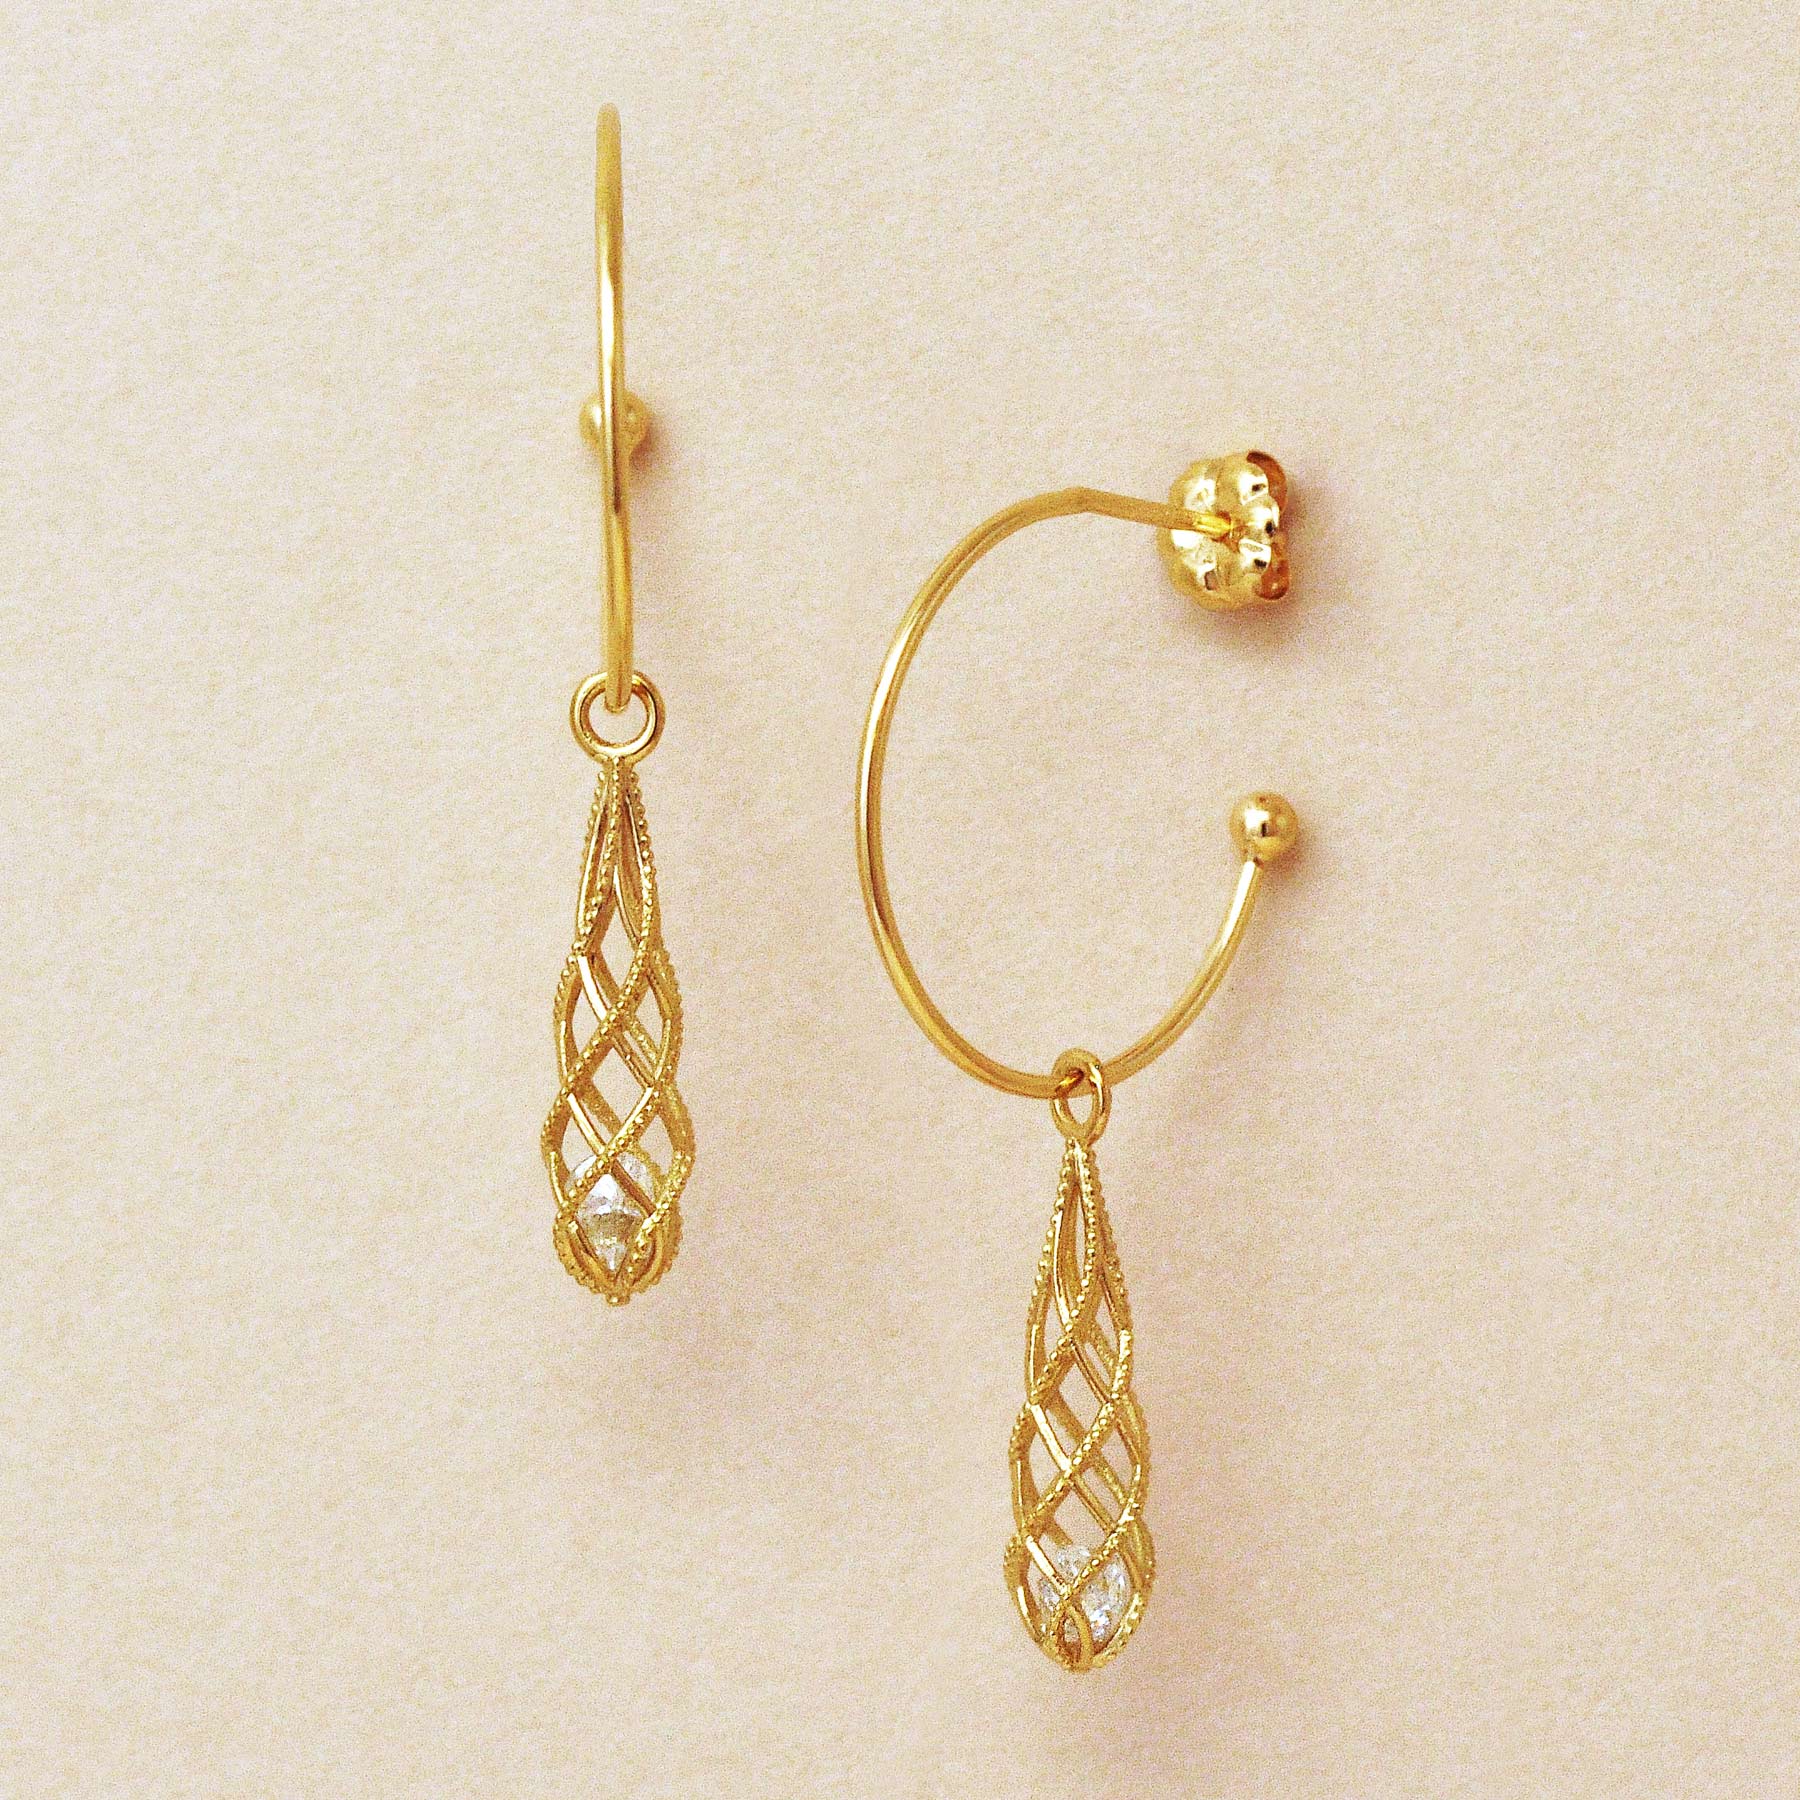 18K Yellow Gold Pannier Long Drop Crescent Earrings - Product Image